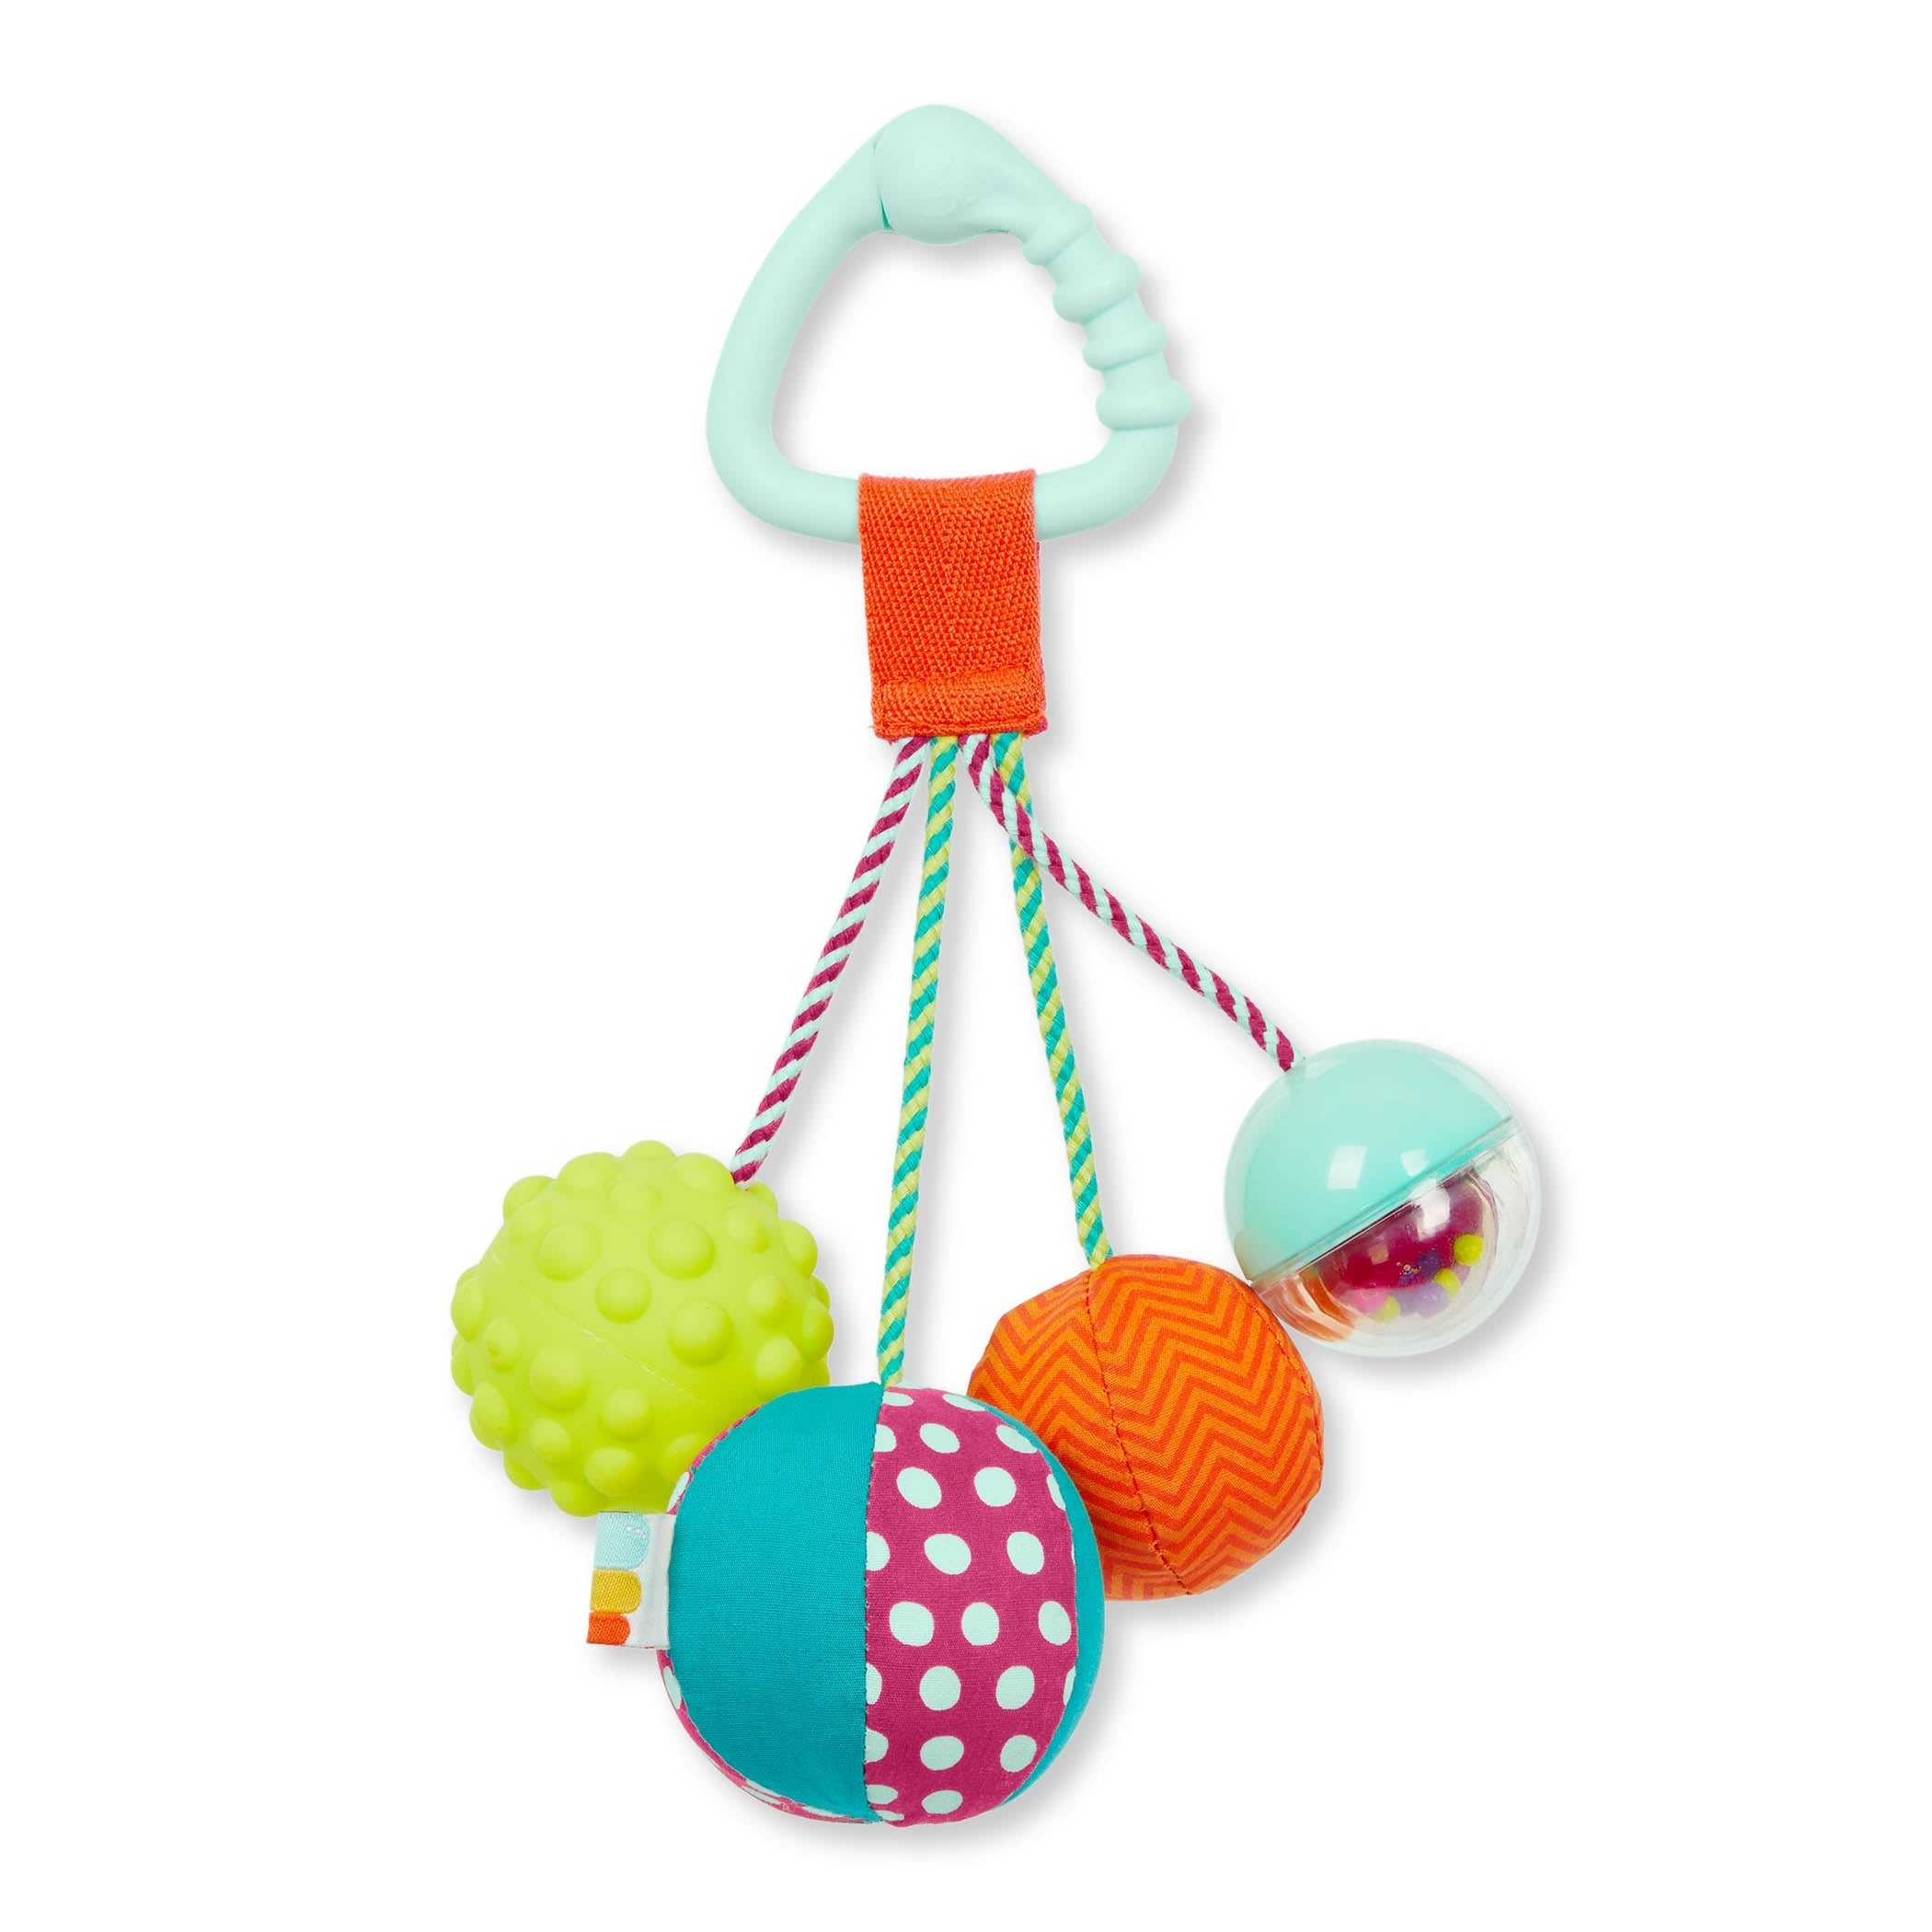 B.Toys: sensory balls with bite Sounds So Squeezy